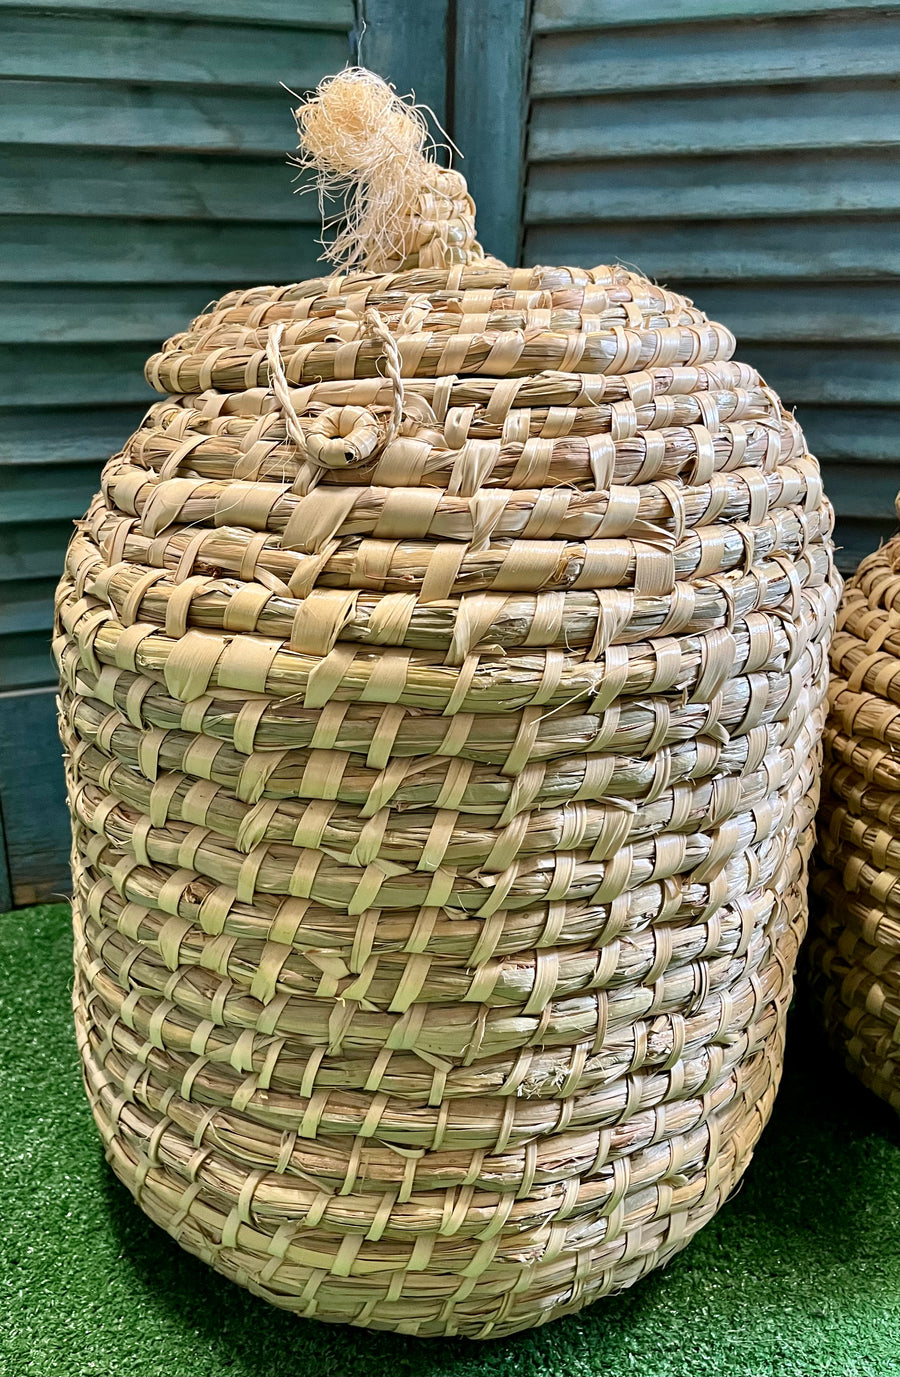 Oval Seagrass Basket with Lid